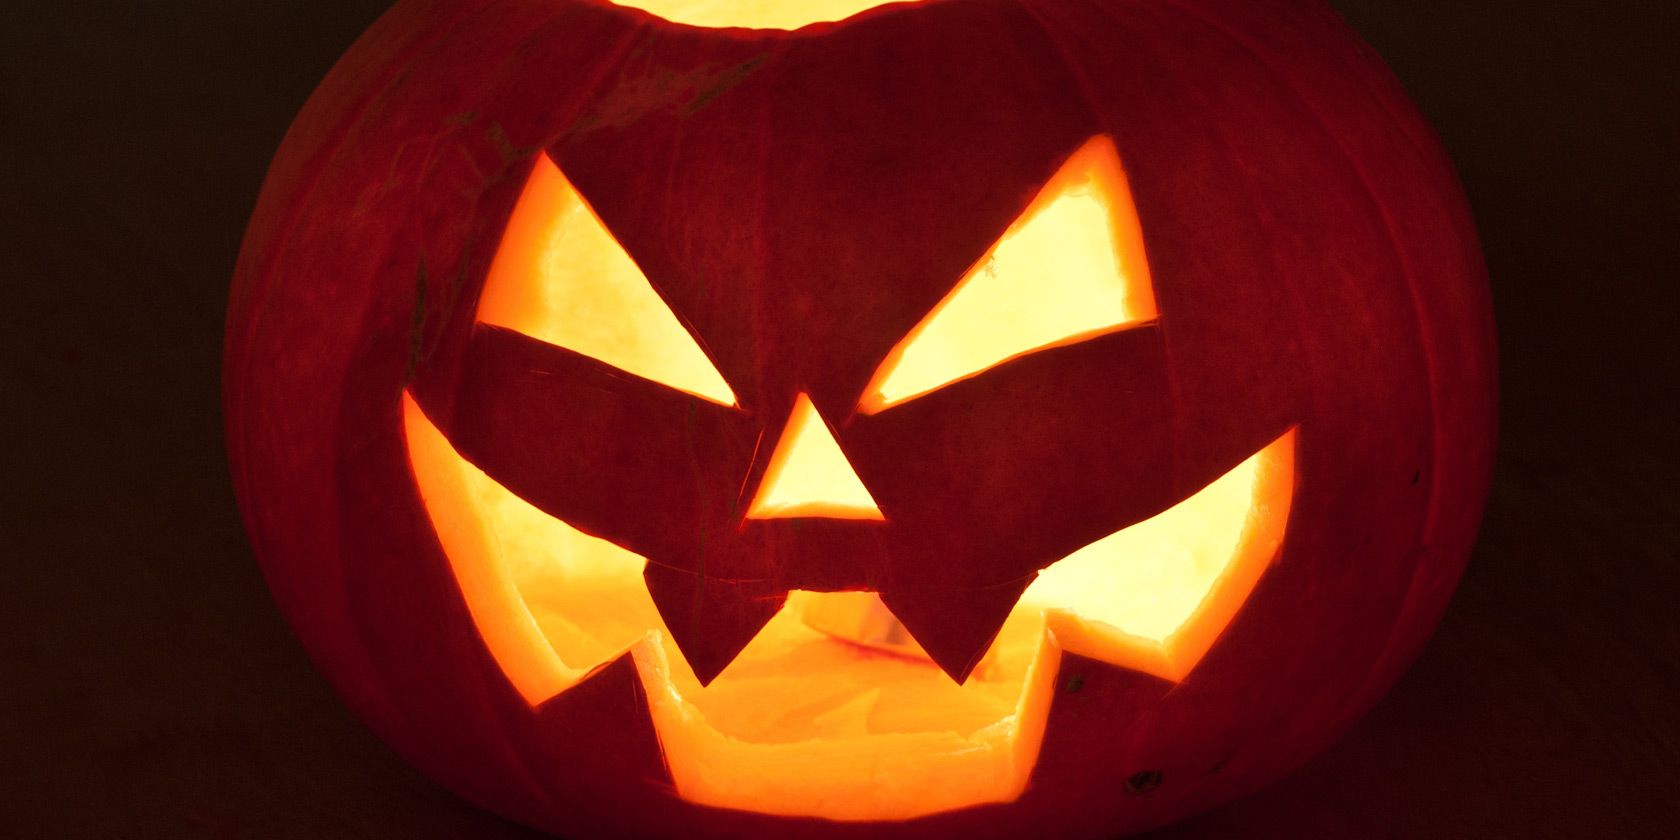 7 Tech Savvy and Fiendish Tips to Get Ready for Halloween